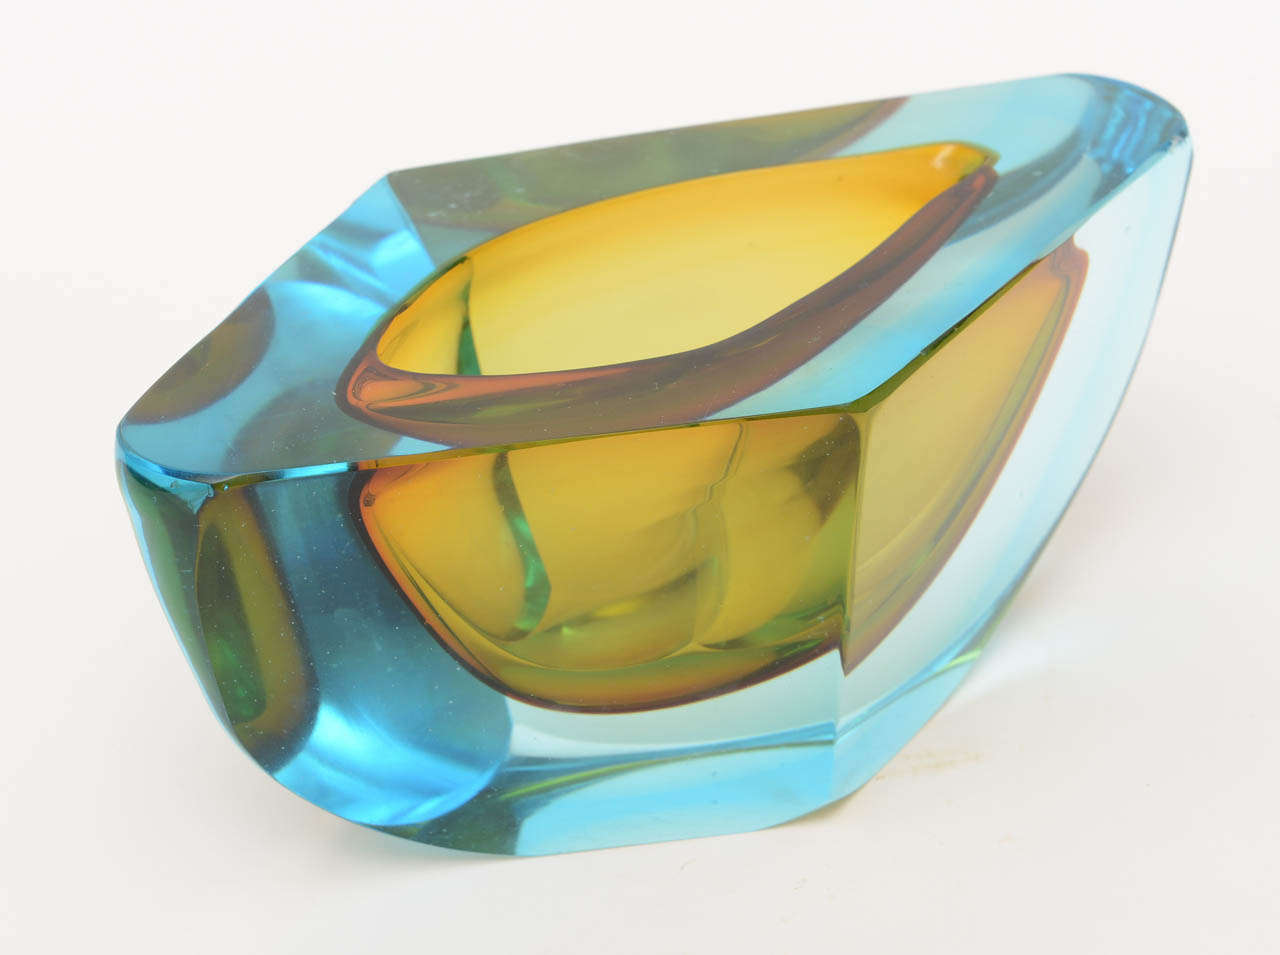 Turquoise to chartreuse in layers of sommerso glass make up this incredibly
heavy and seductively luscious glass Italian bowl. It is by Tiozzo and Ferro.
Stellar color and form!!!

It has a triangular elongated form... Italian all the way!!